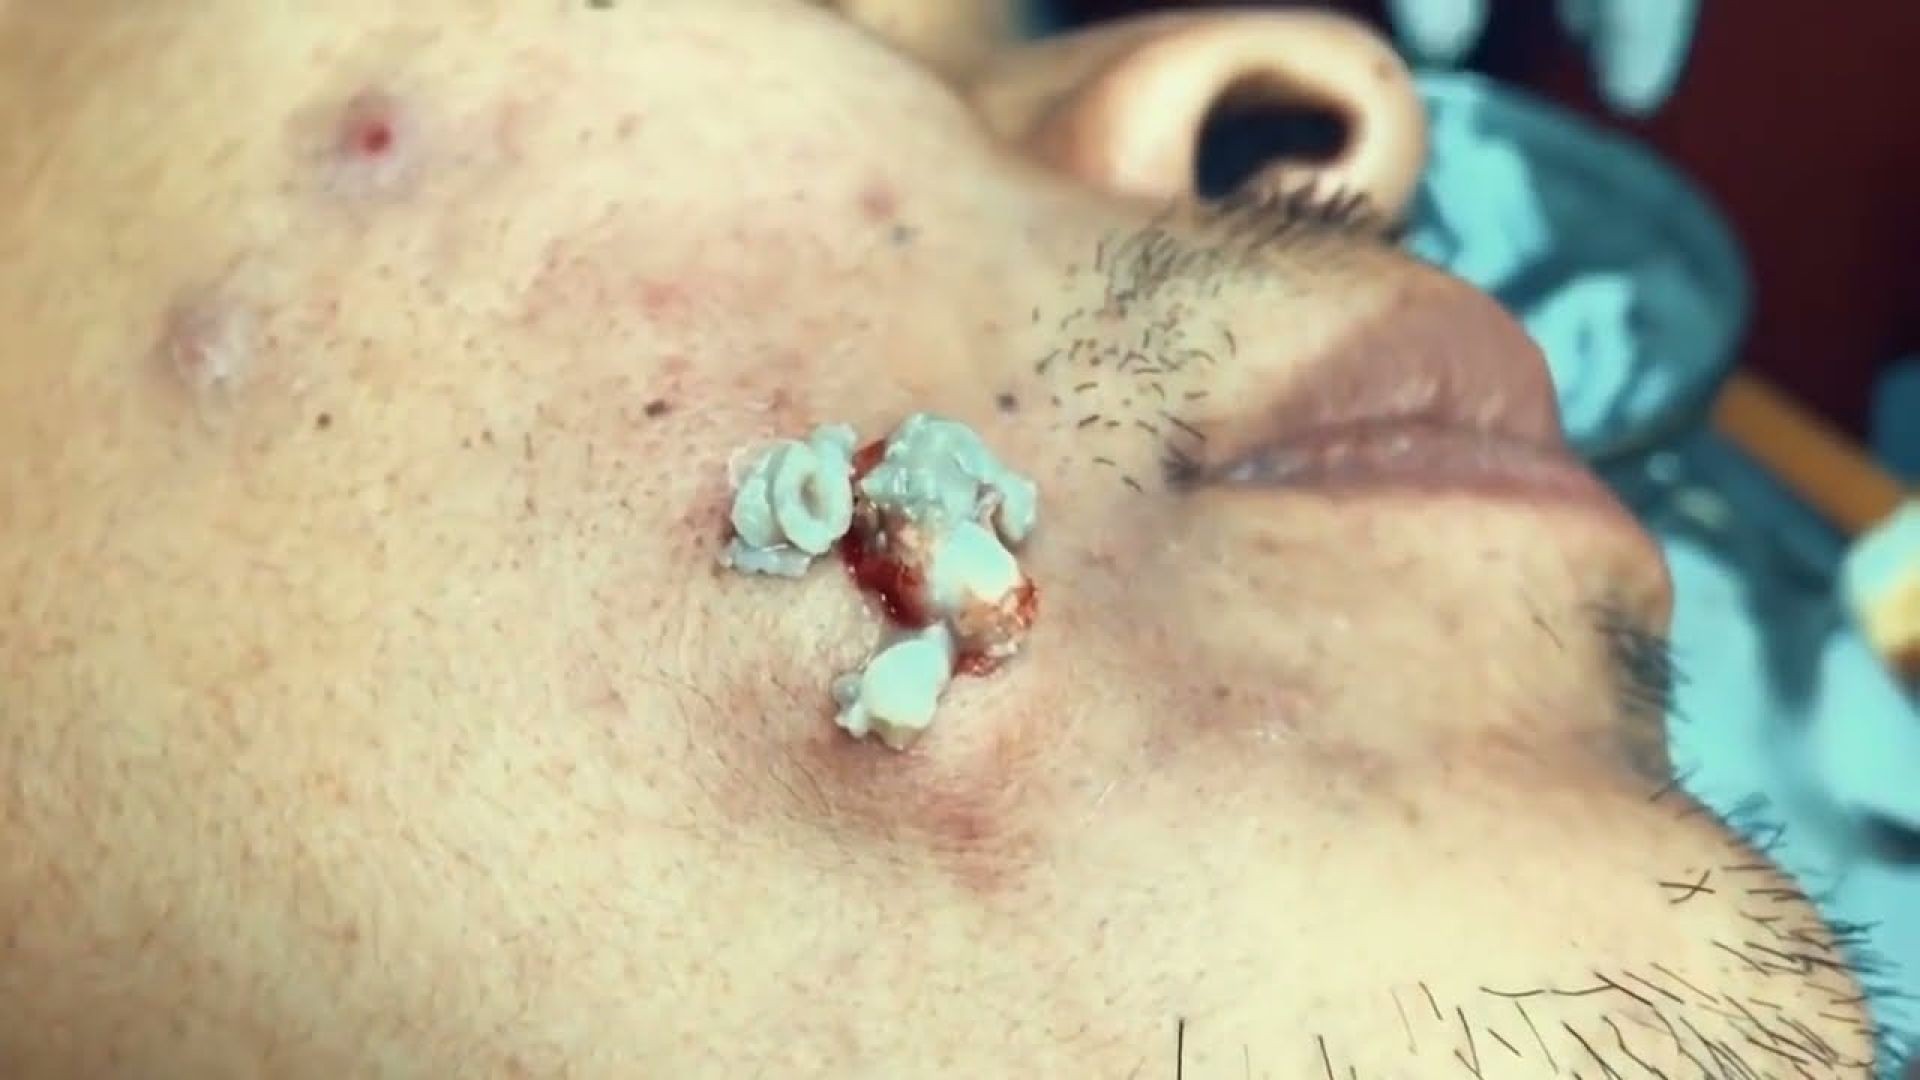 GIGANTIC Facial Brand new Cyst Popping Videos